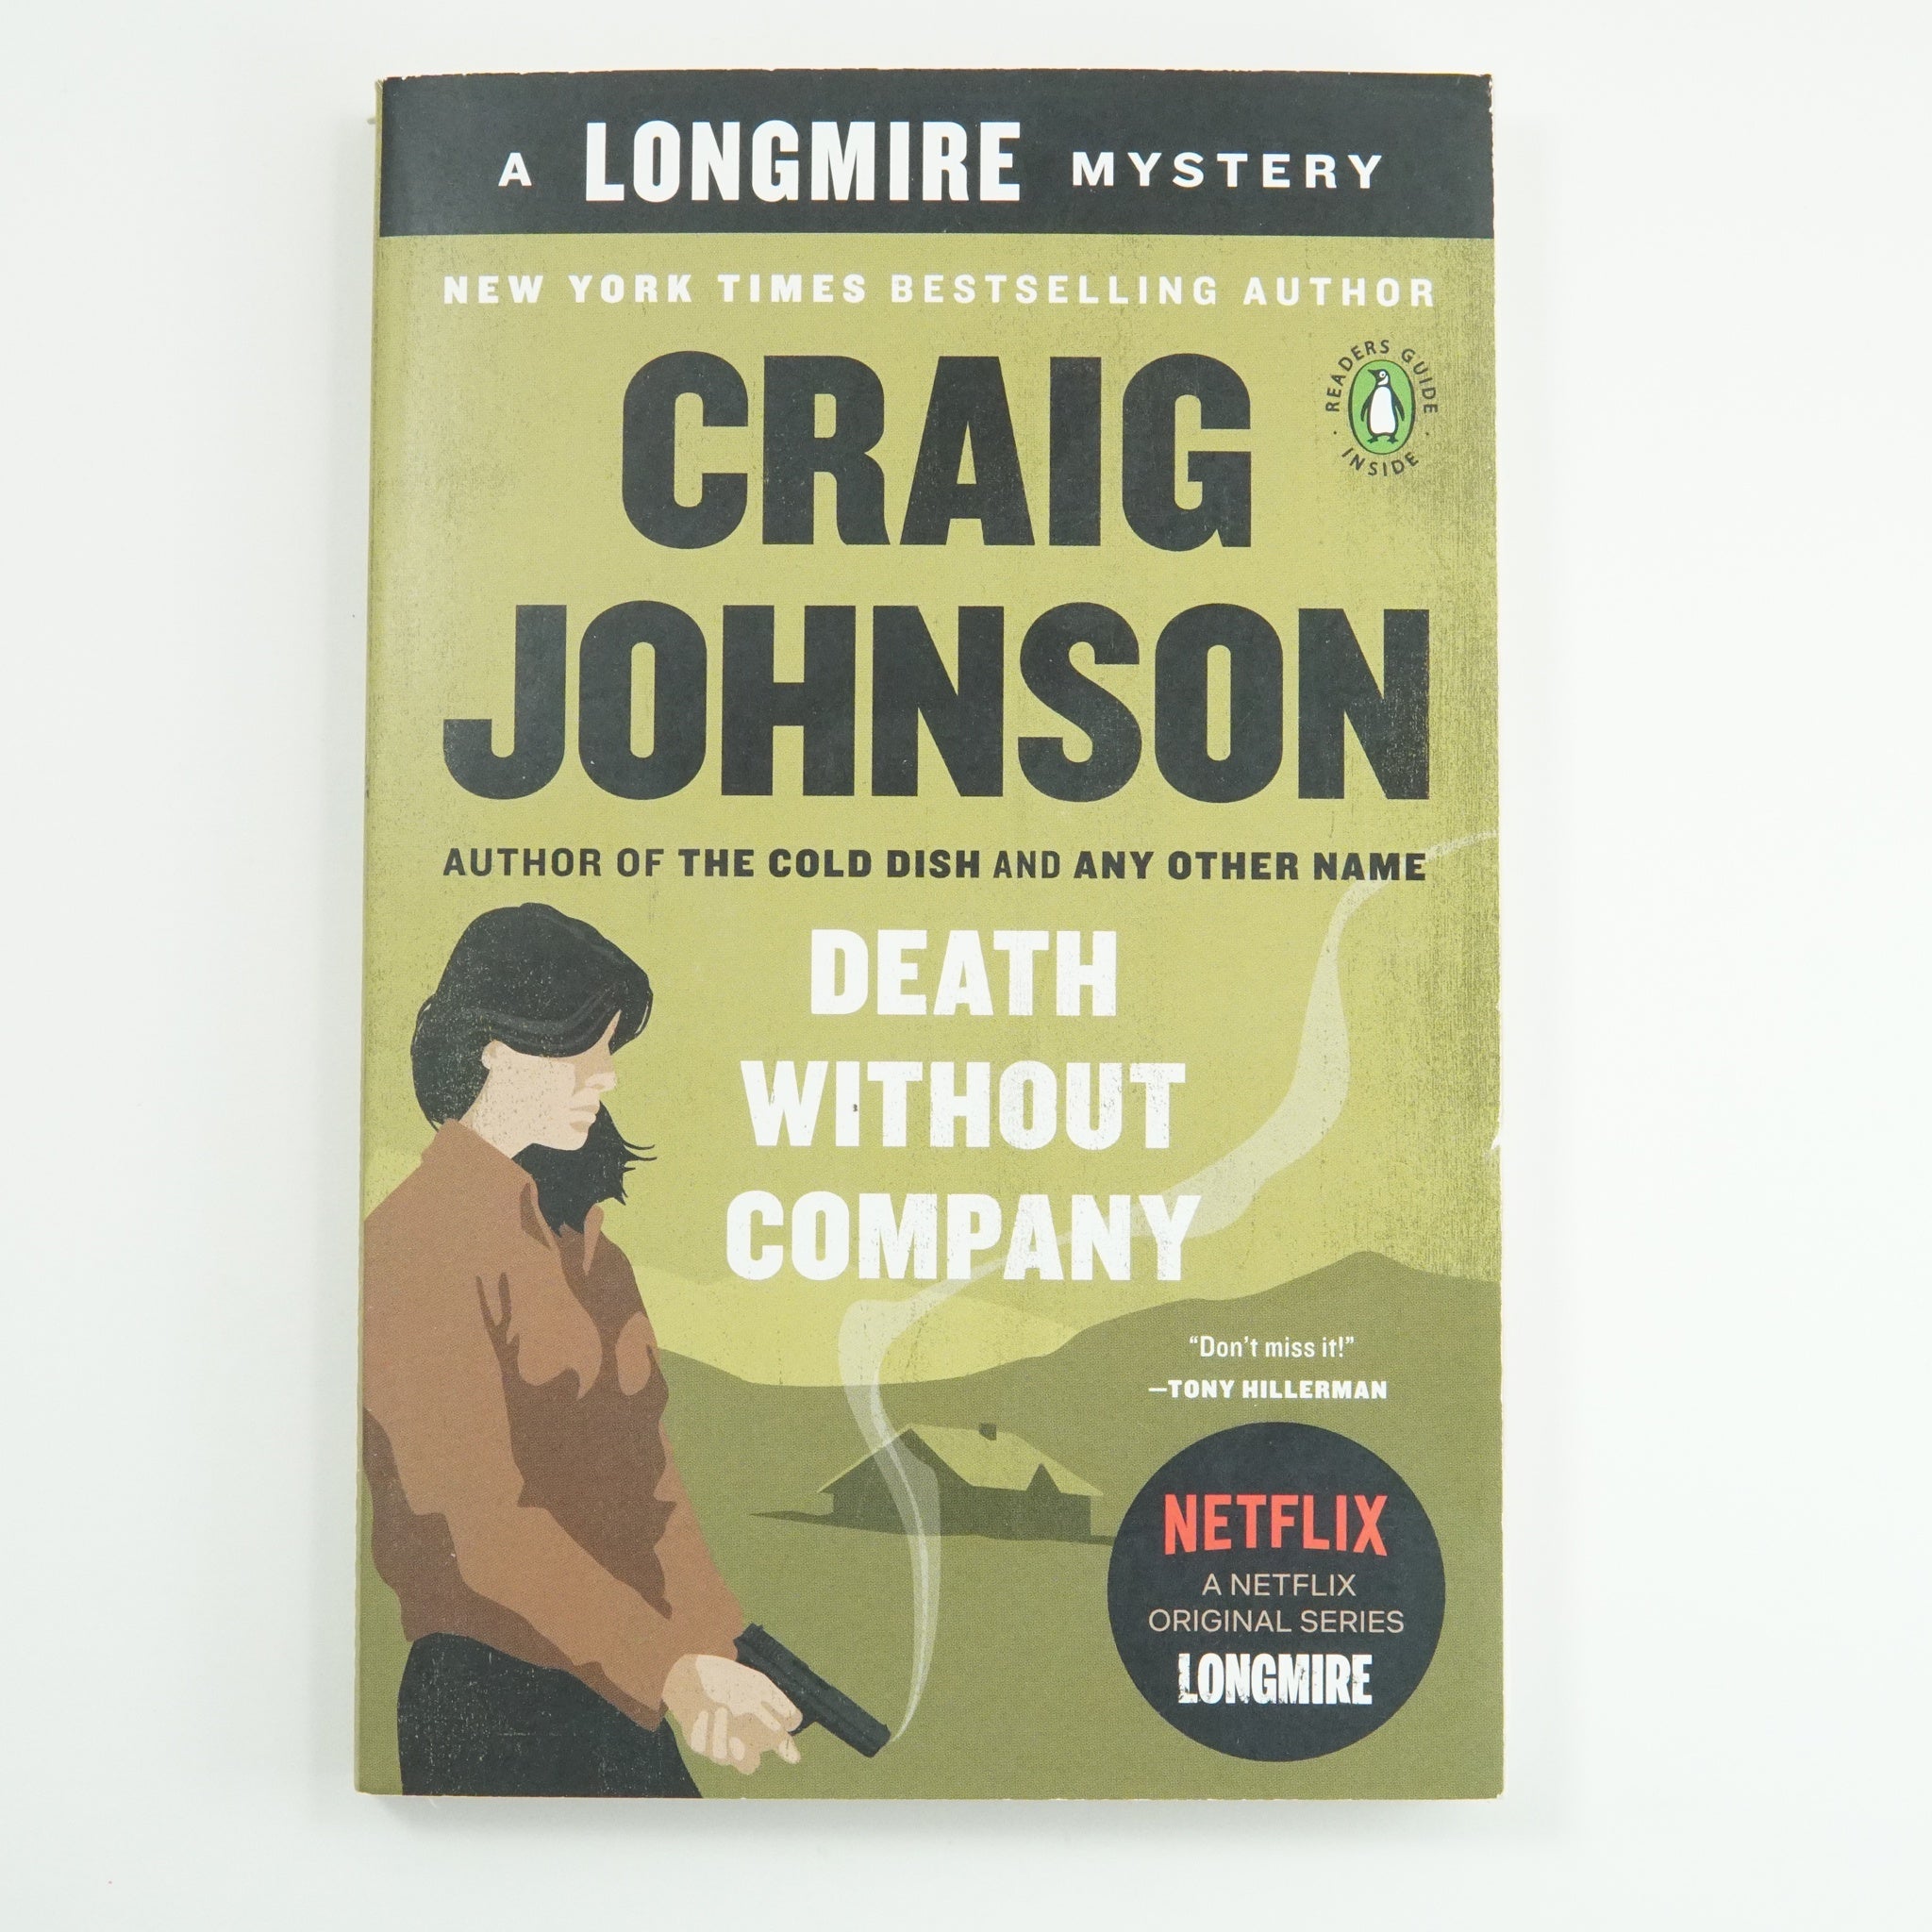 BK 5 DEATH WITHOUT COMPANY BY CRAIG JOHNSON #21040672 D2 MAY23